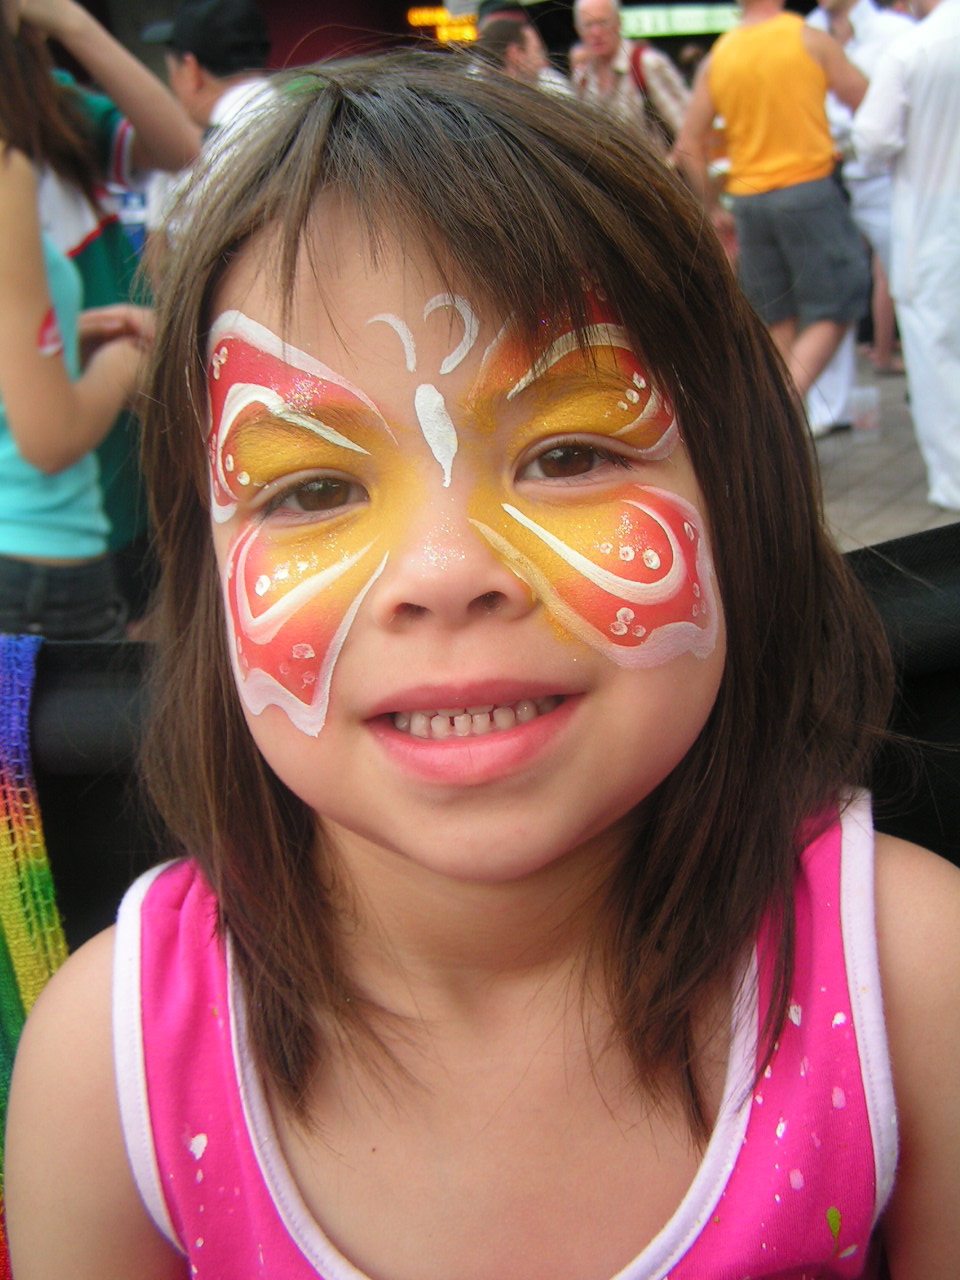 Body Painting Show: Face Painting Party - Birthday Ideas For Children